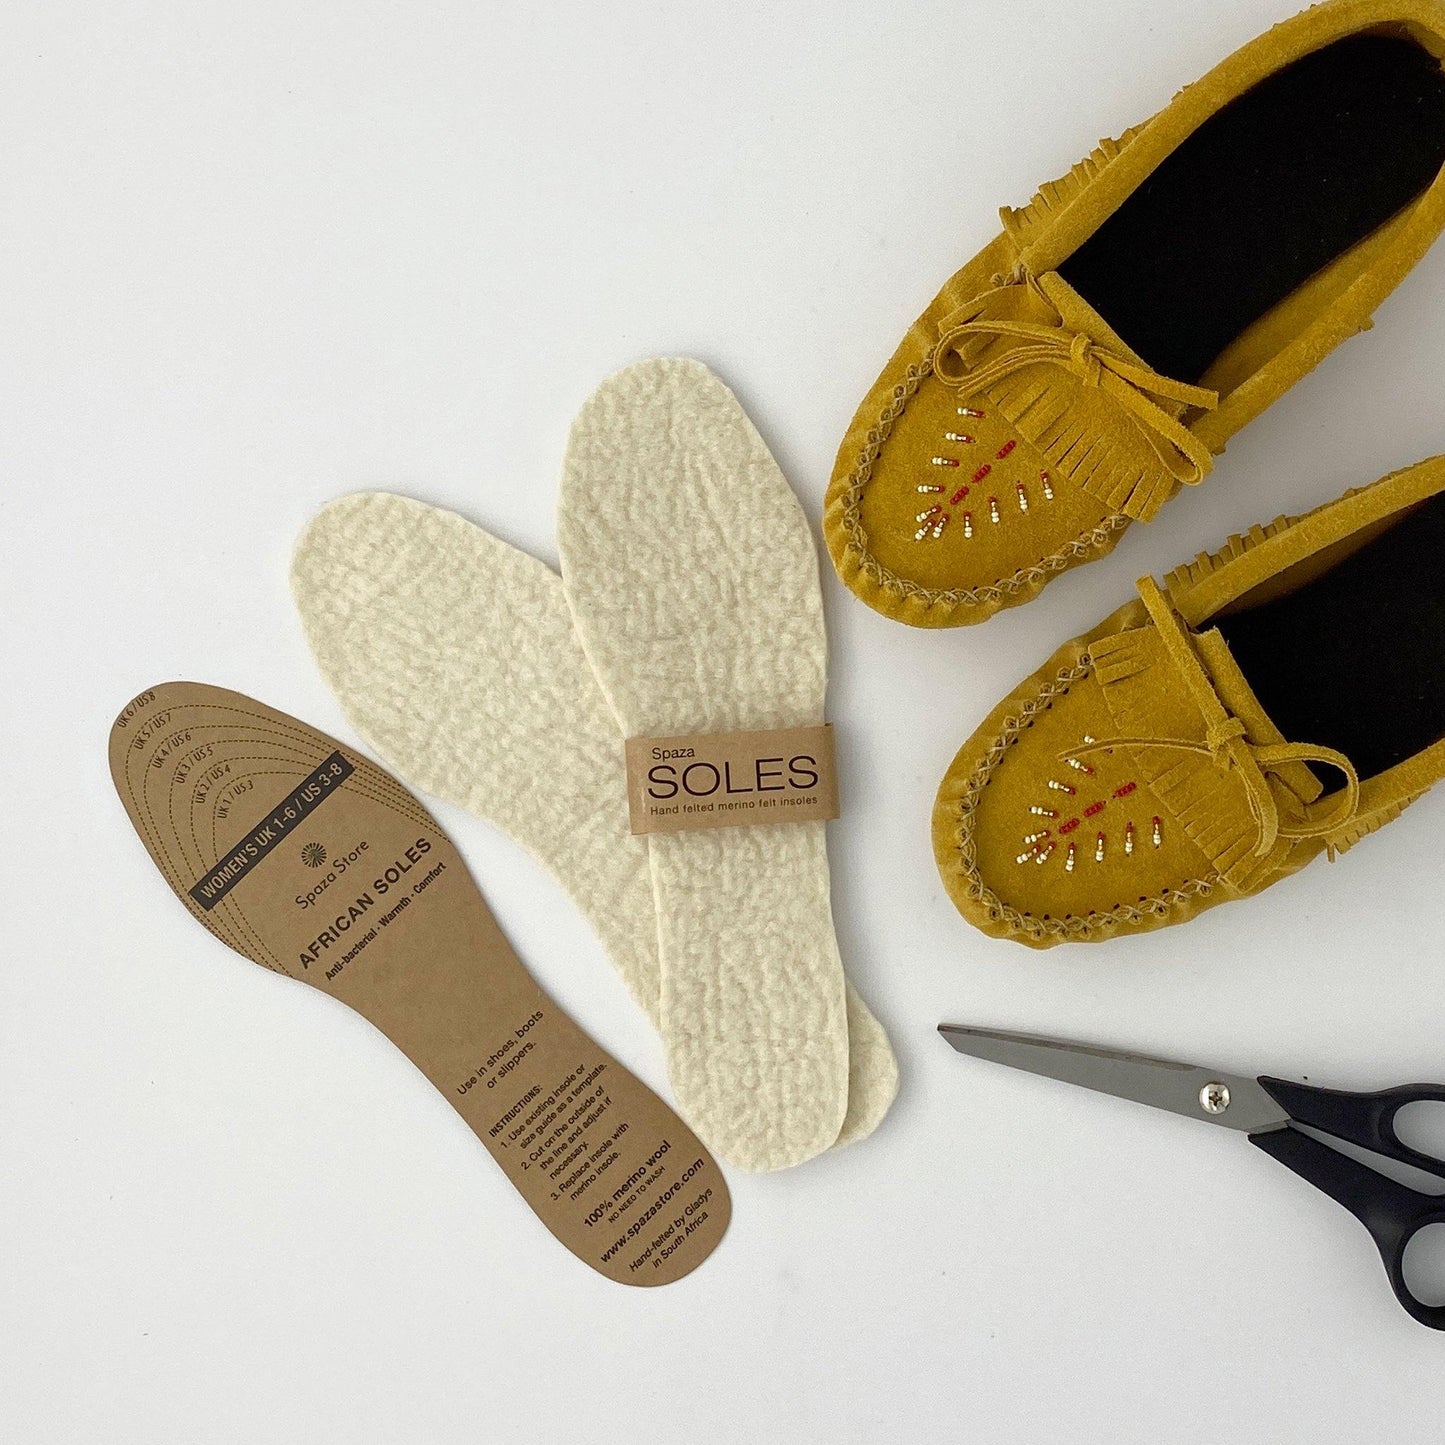 Felt Insoles: Merino Wool inserts for shoes, boots and slippers - SpazaStore